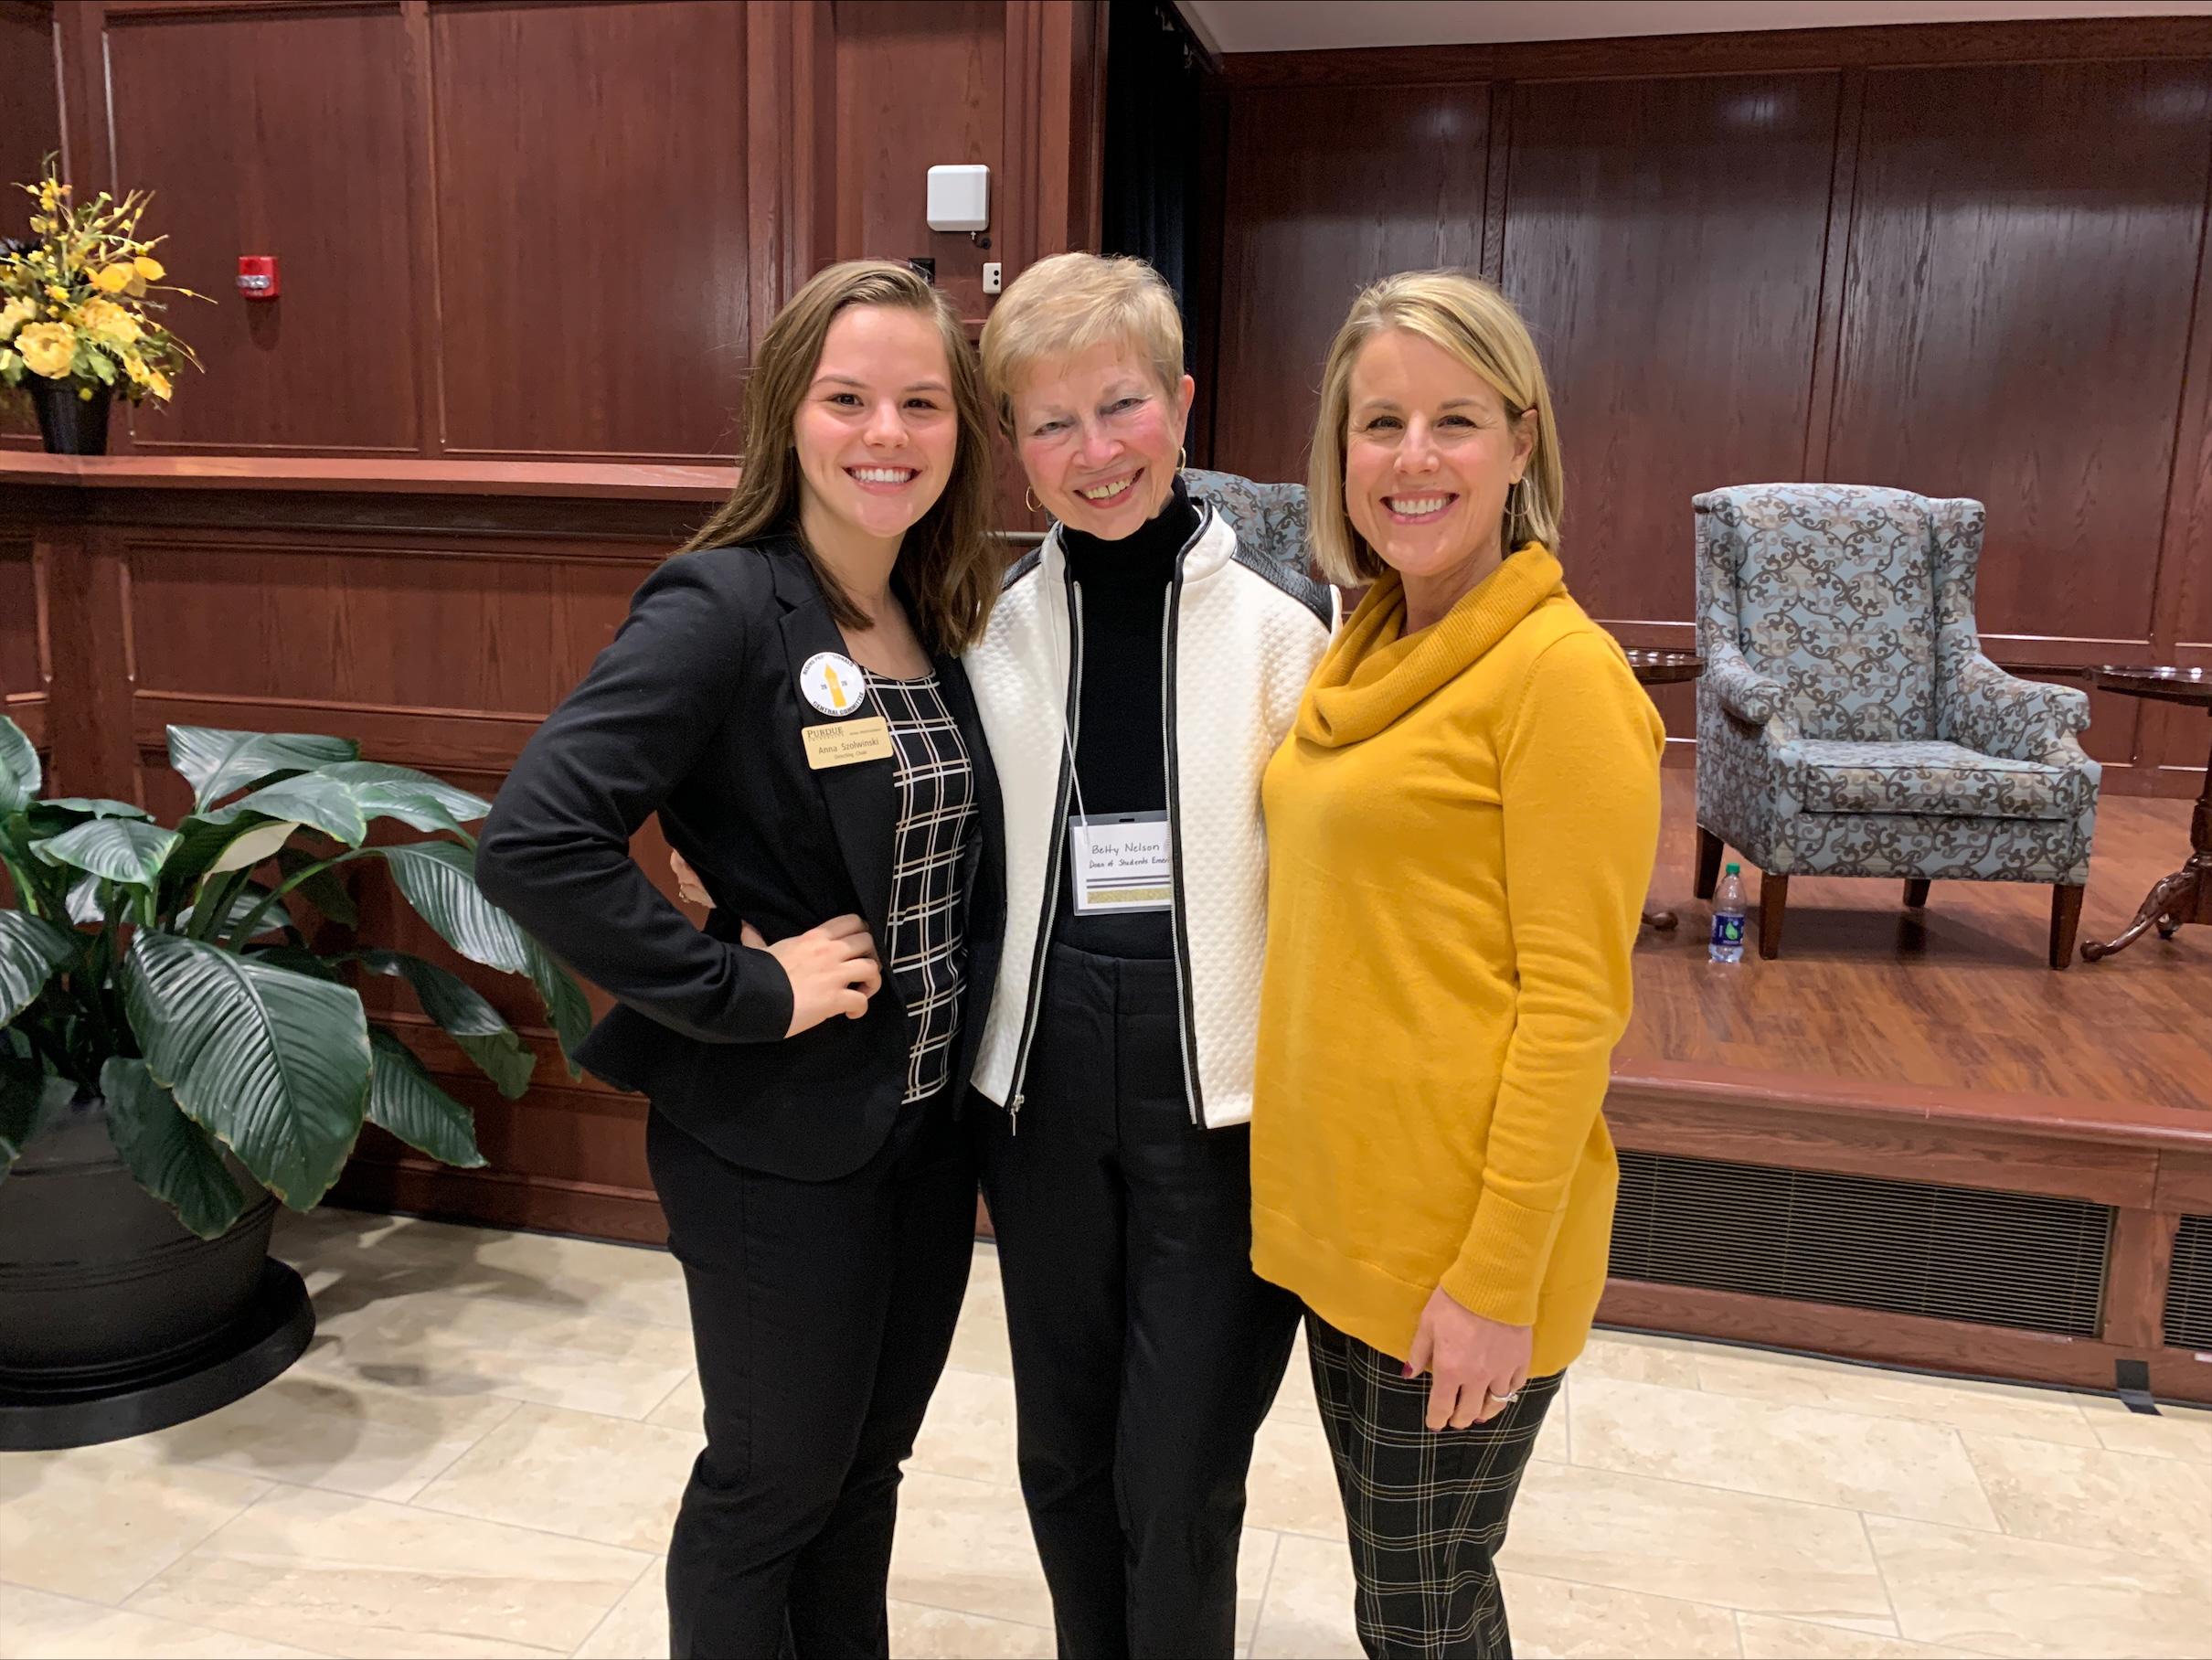 Anna Szolwinski and her mentors at the Women's Leadership Series